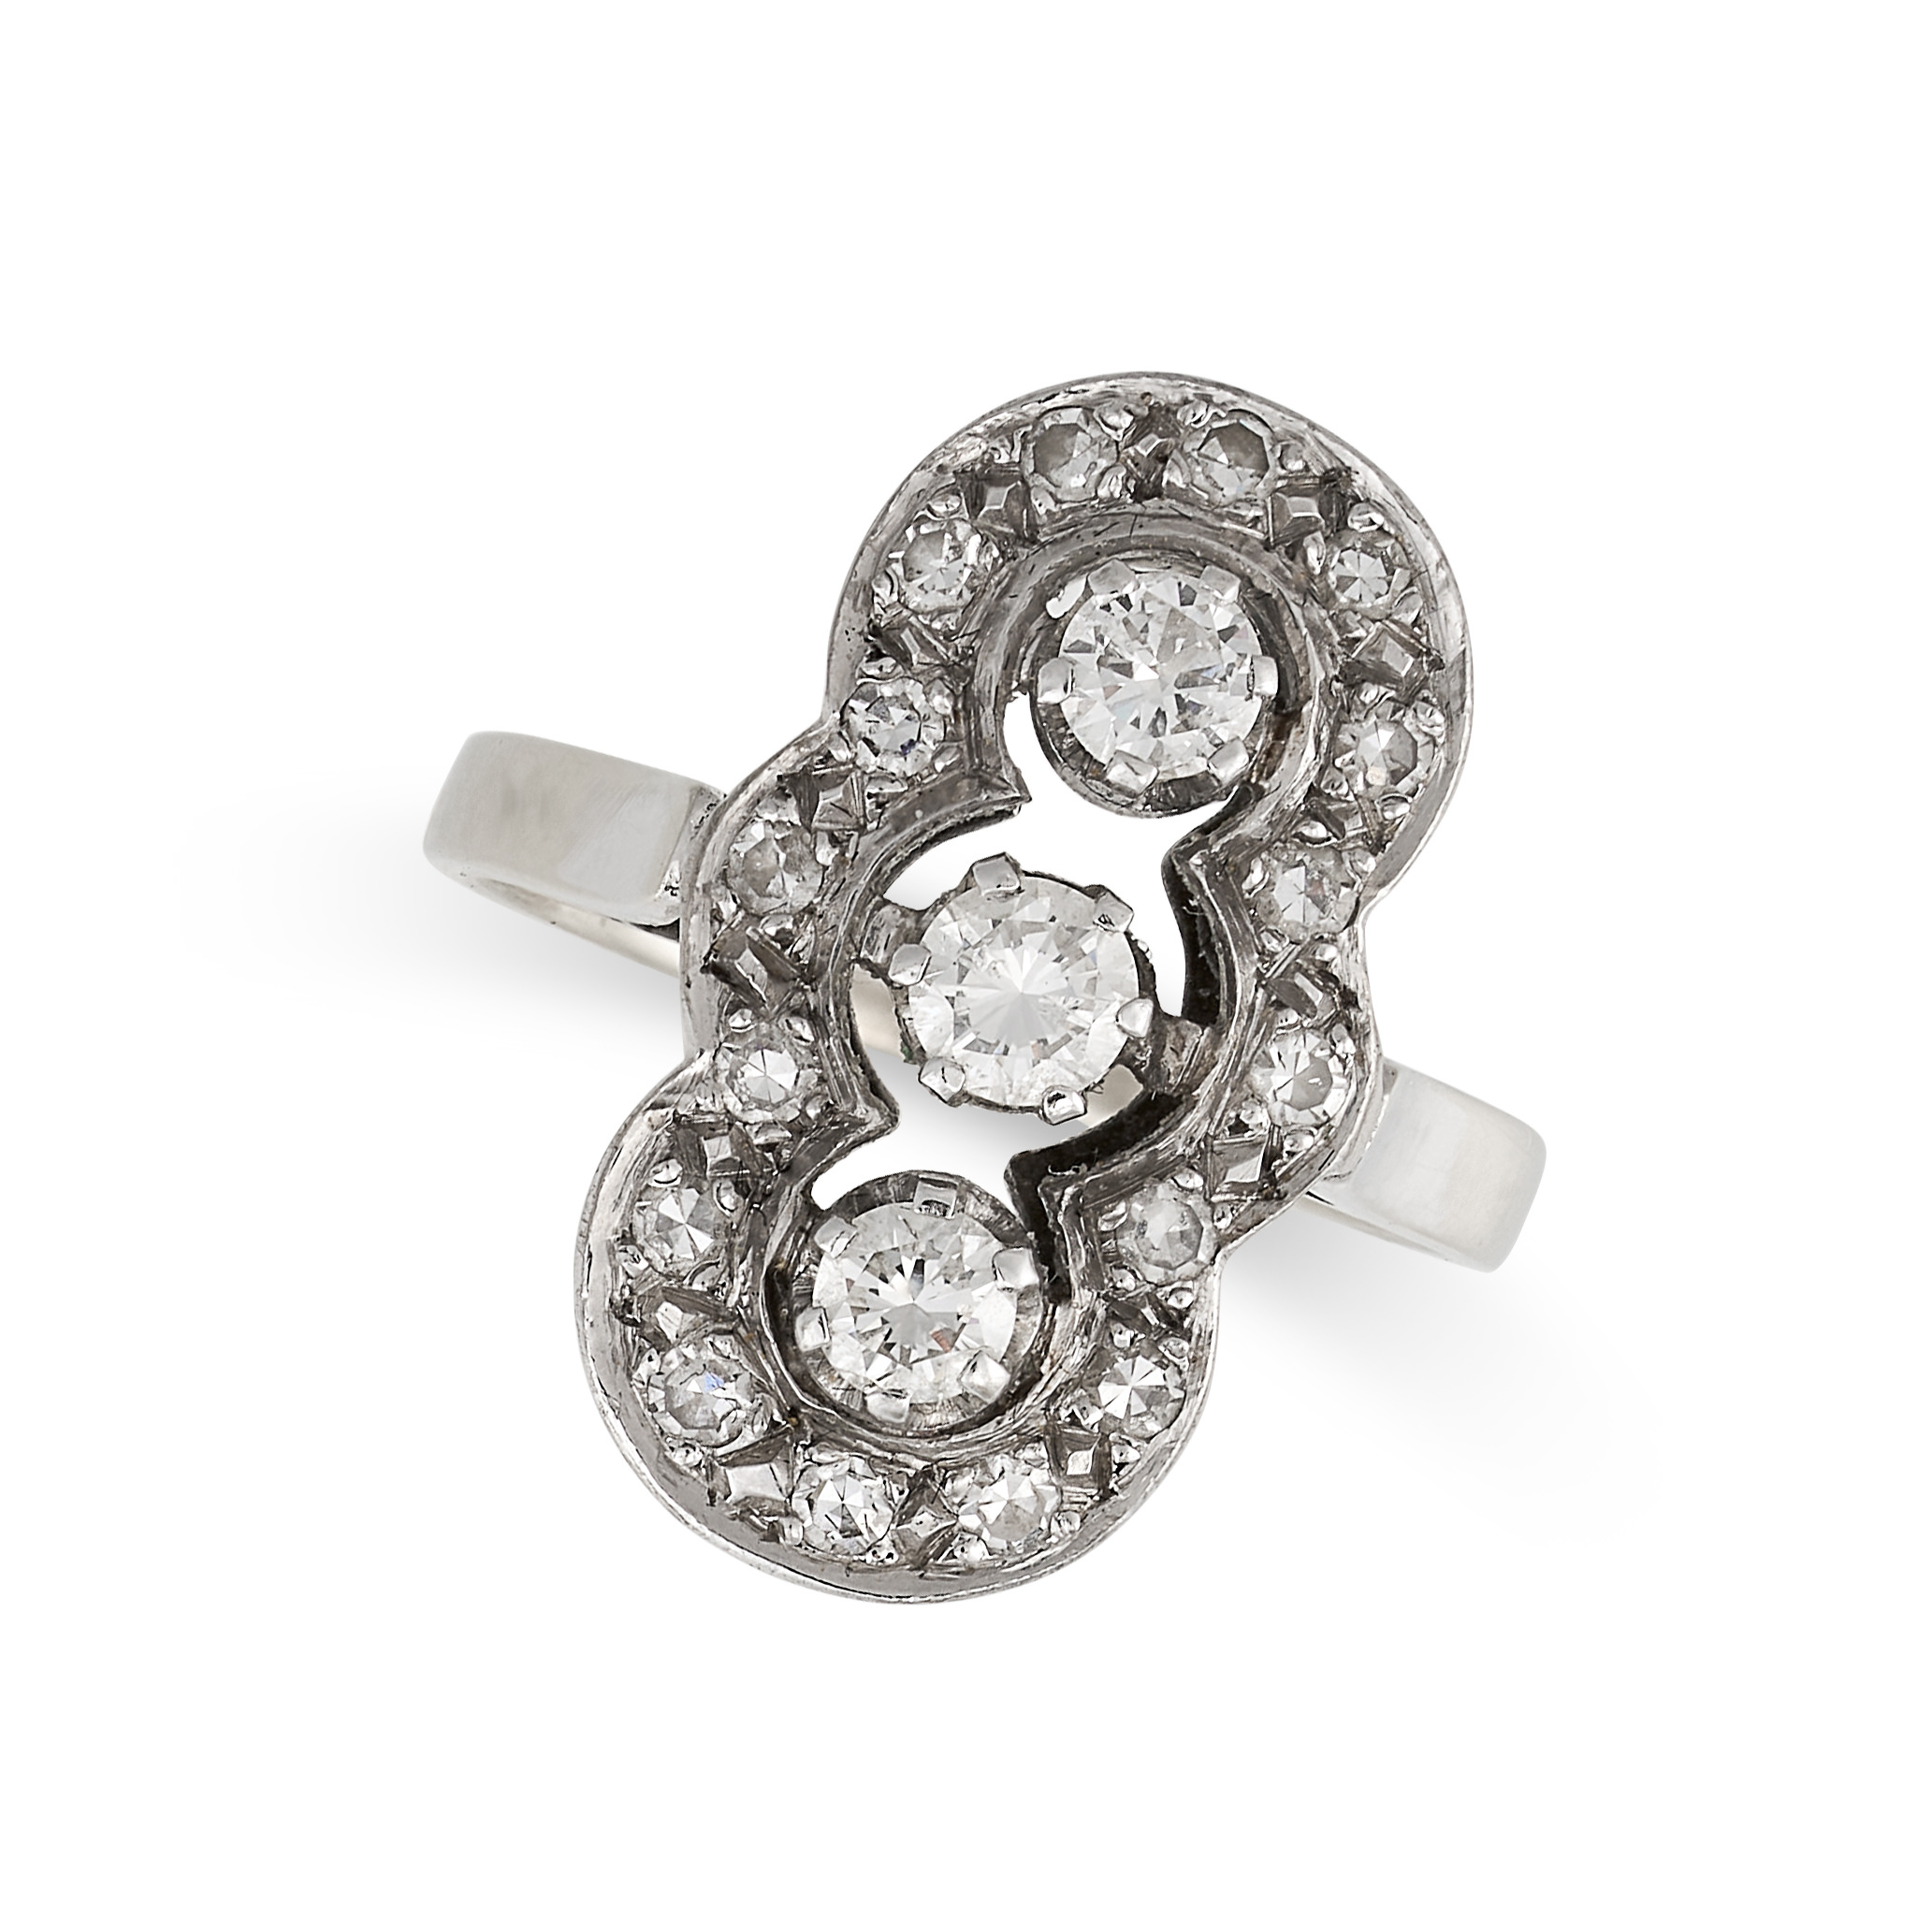 NO RESERVE - AN ART DECO DIAMOND RING in 14ct white gold, set with three round cut diamonds within a